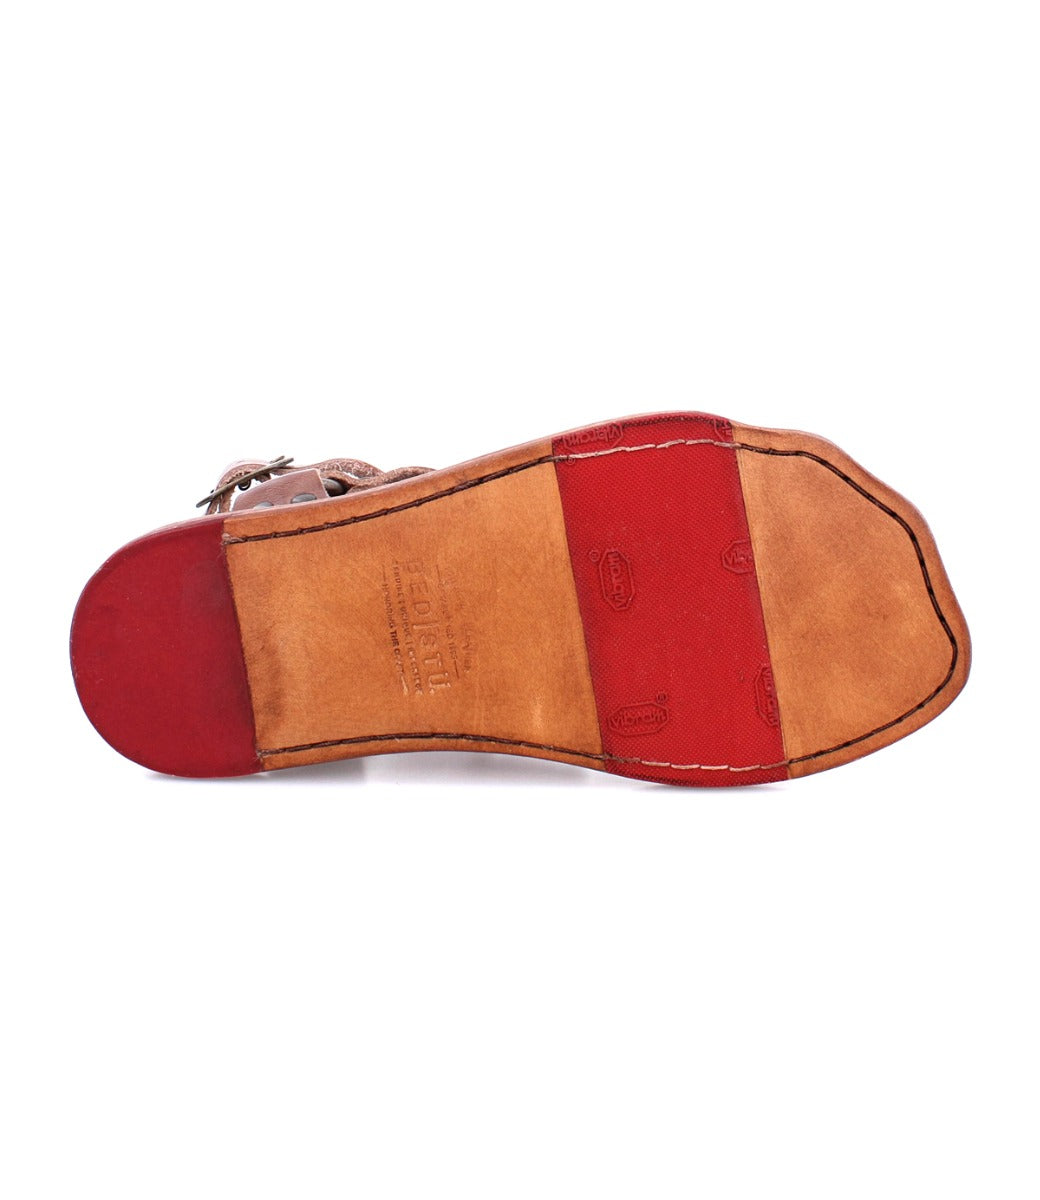 A pair of Hera shoes with a red and brown sole by Bed Stu.